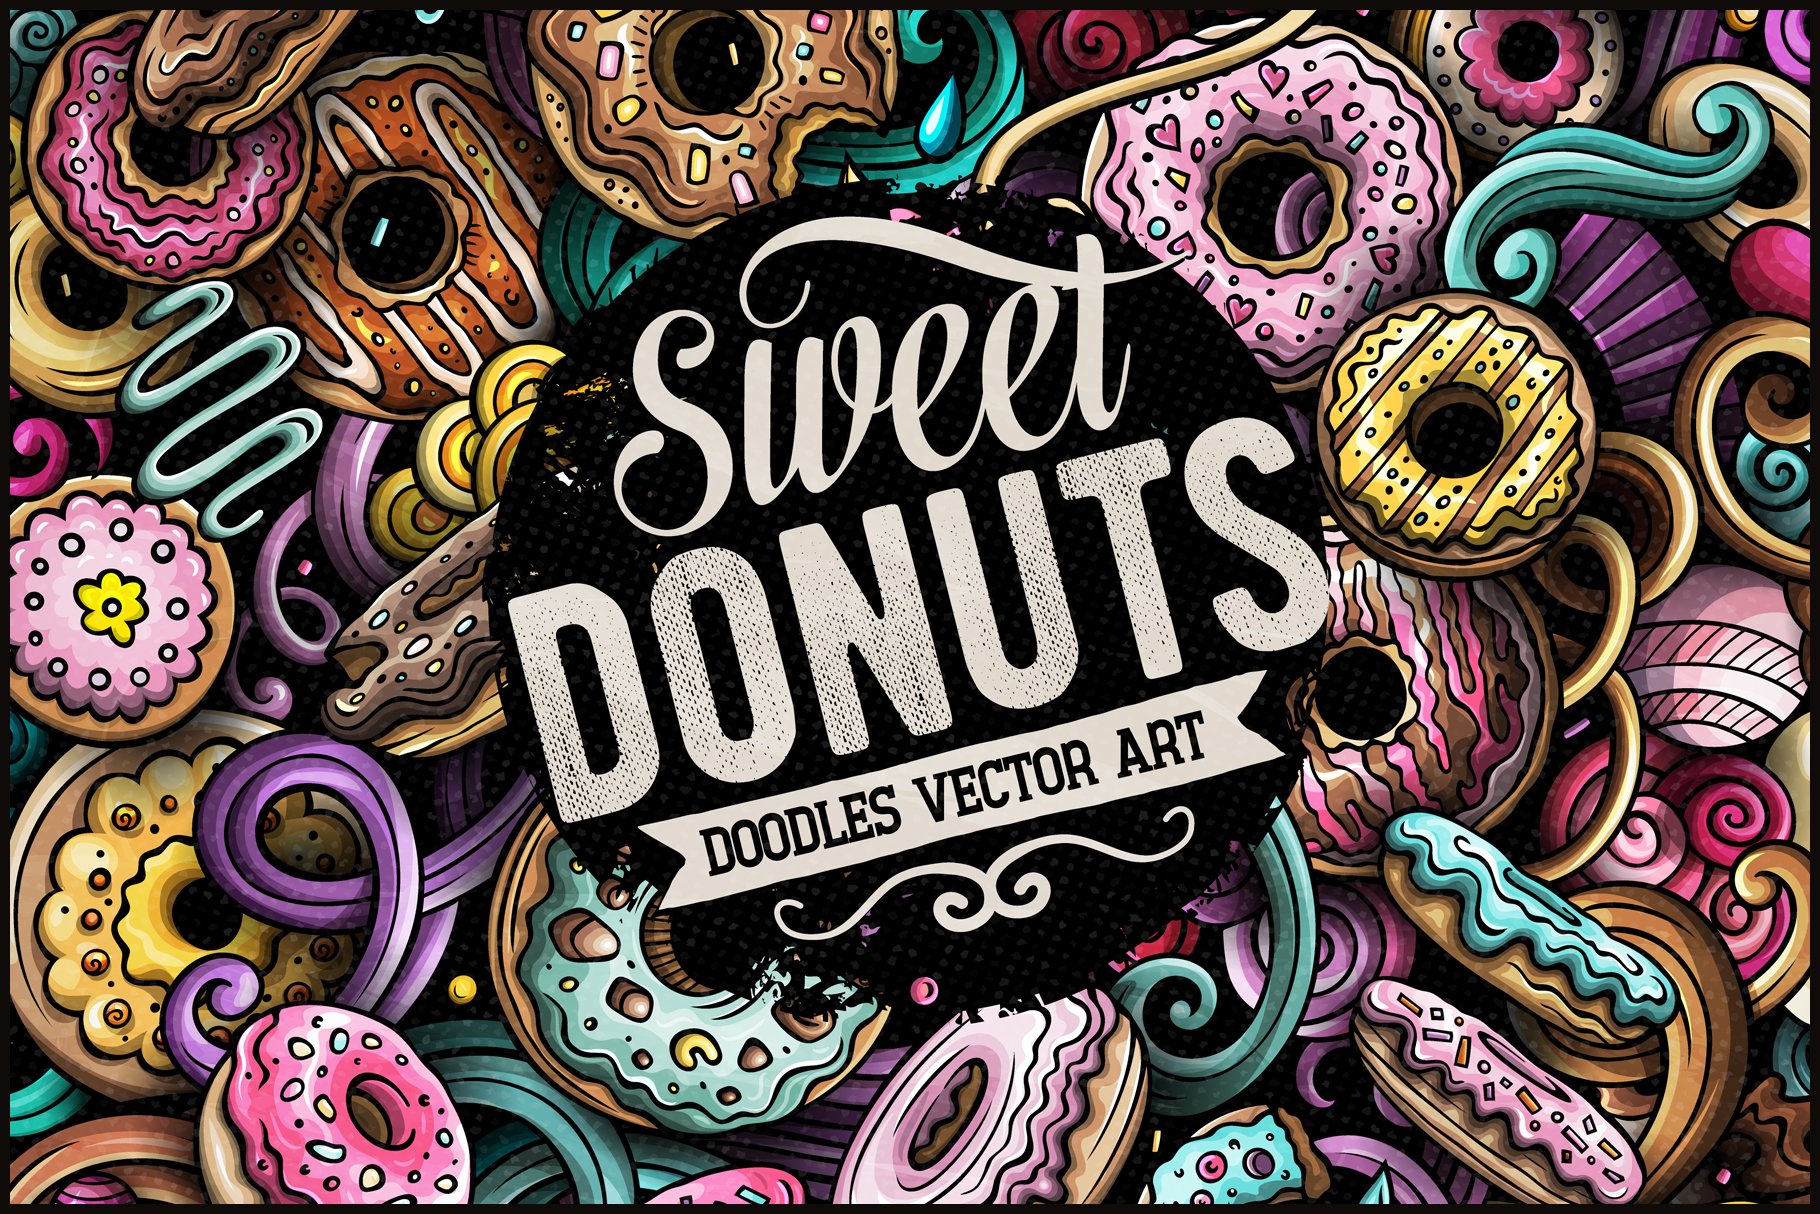 Donuts Vector Doodle Illustration cover image.